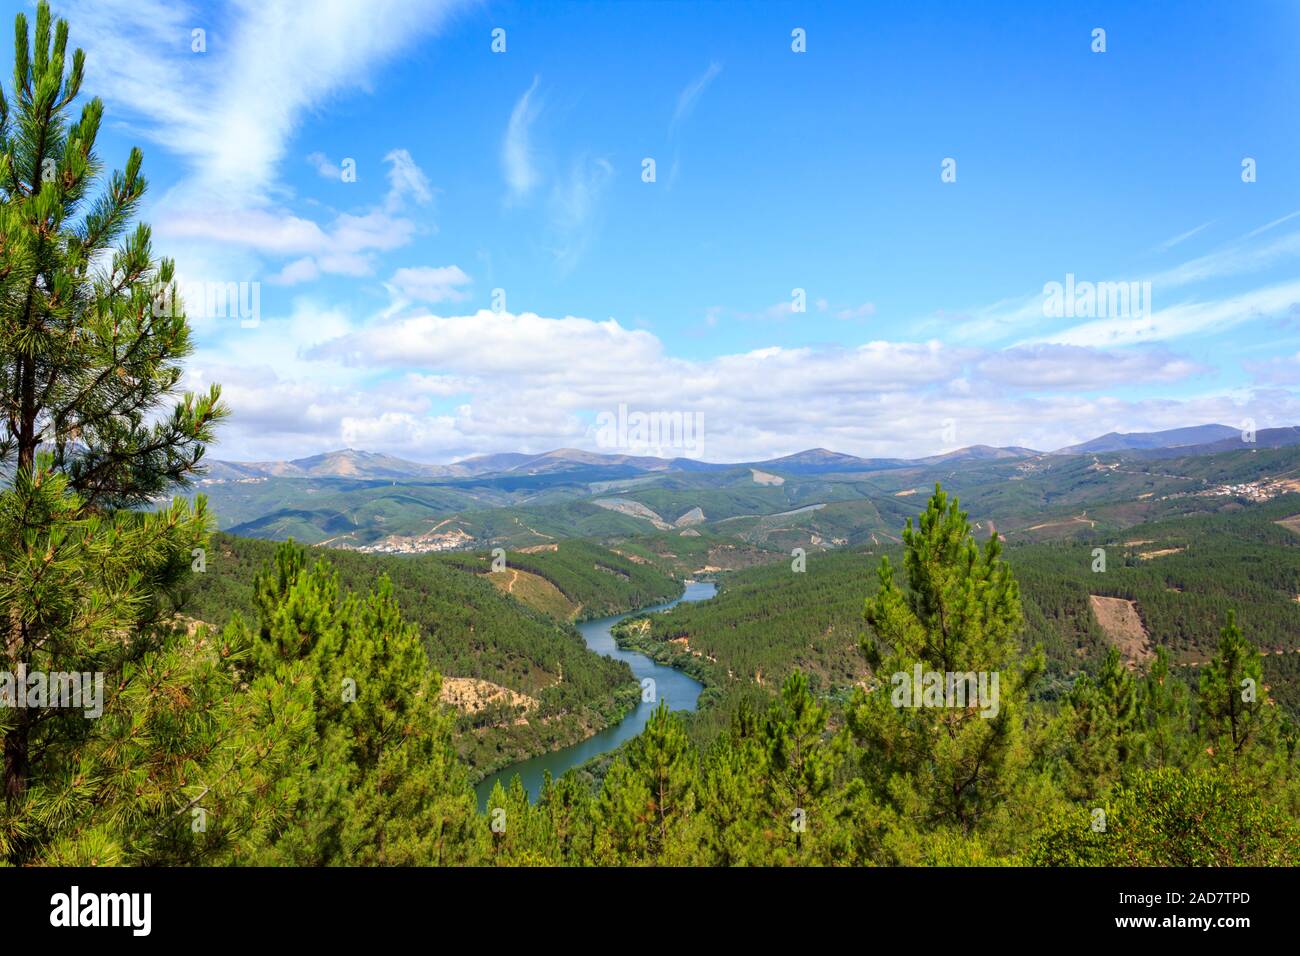 River meander landscape with green nature around Stock Photo